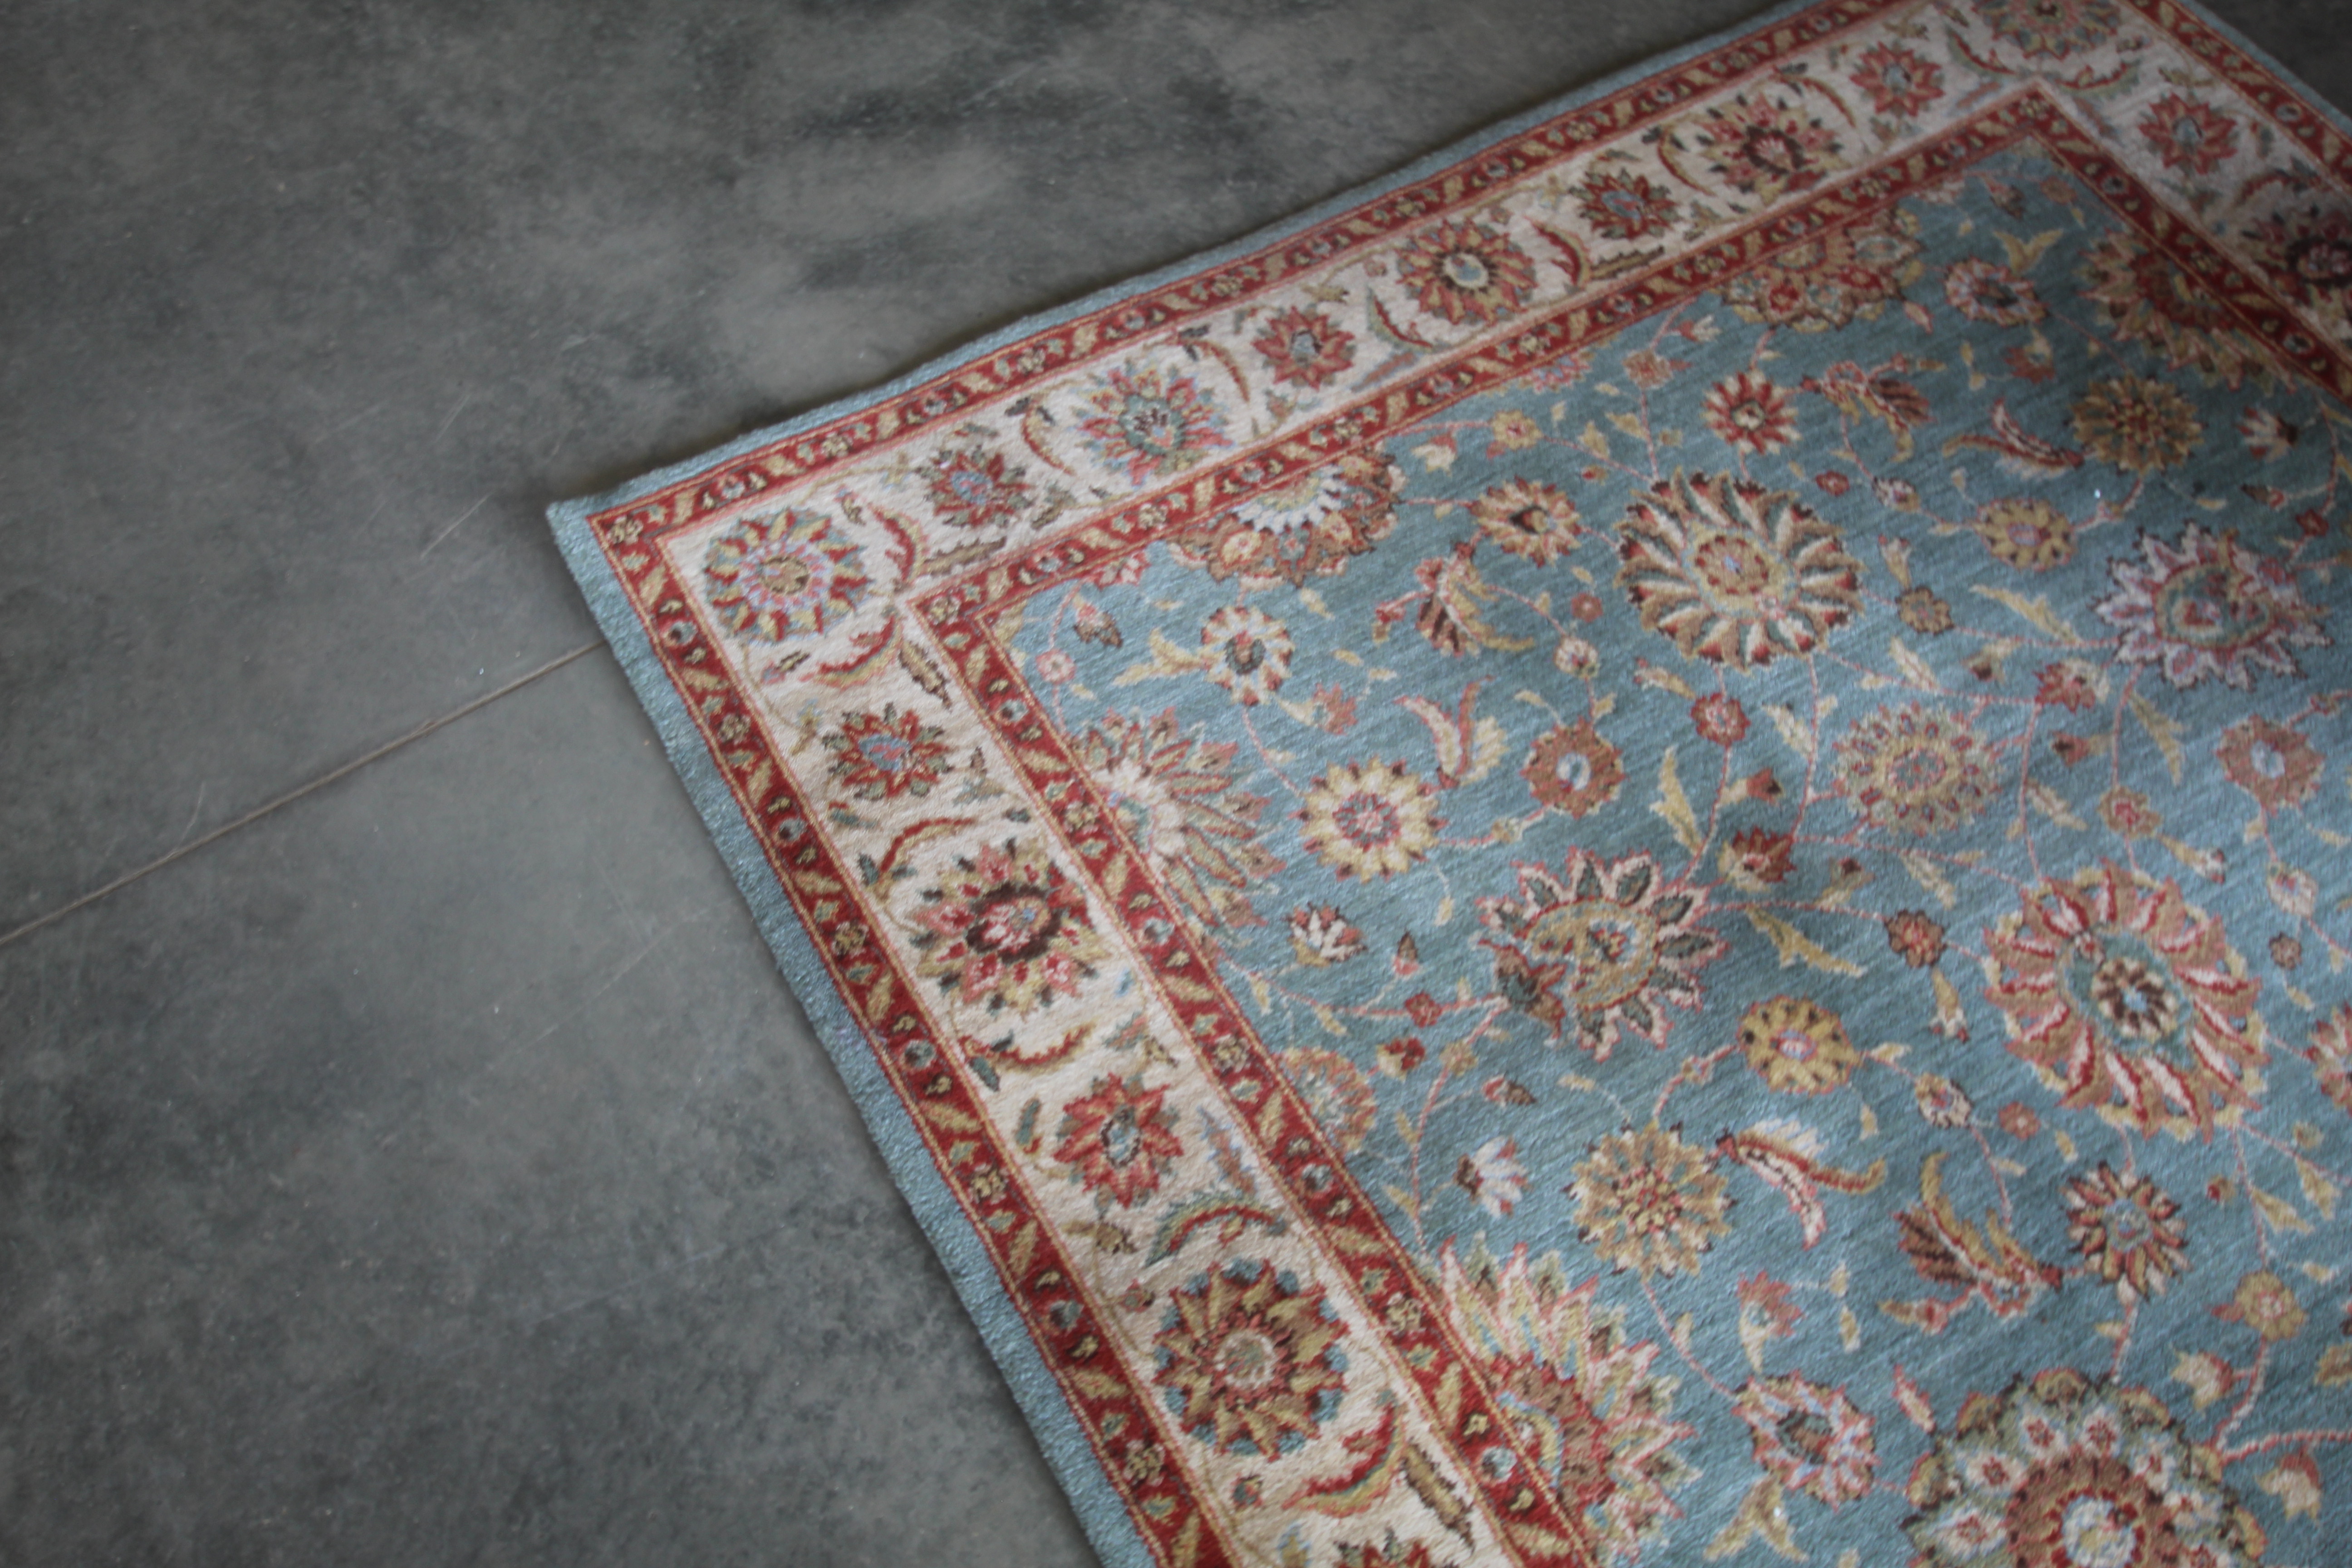 An approx. 8'3" x 5'5" floral patterned rug - Image 5 of 6